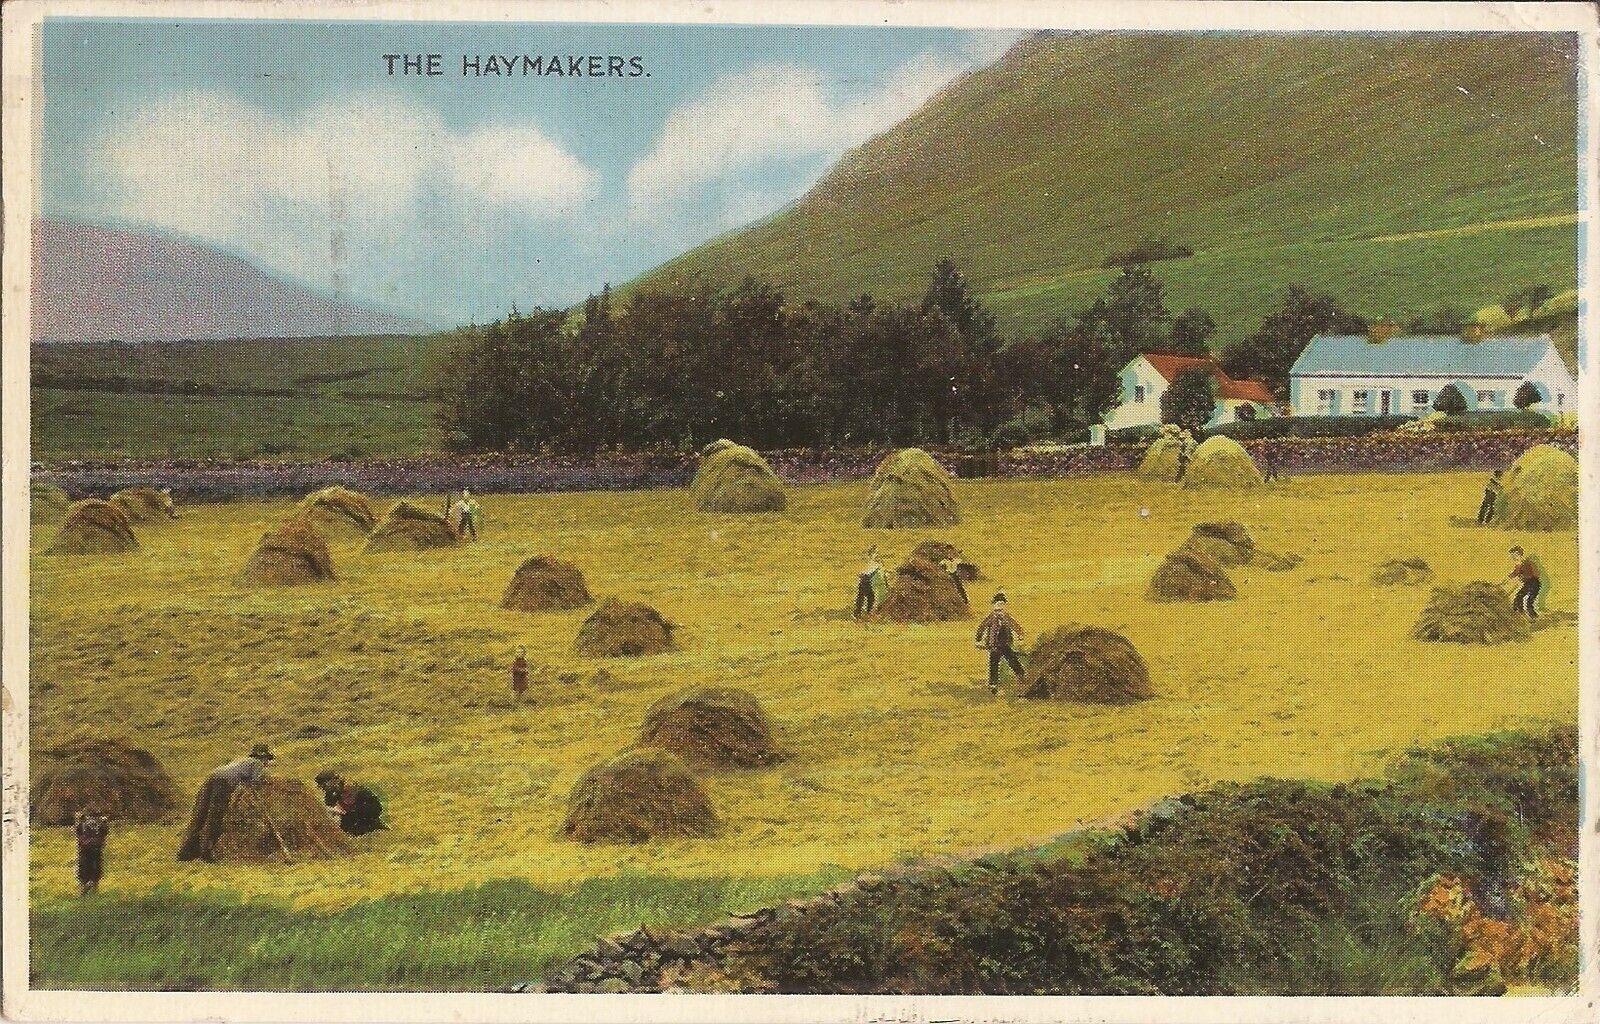 AGRICULTURE:  The Haymakers - Haystacks / Farming - 1956